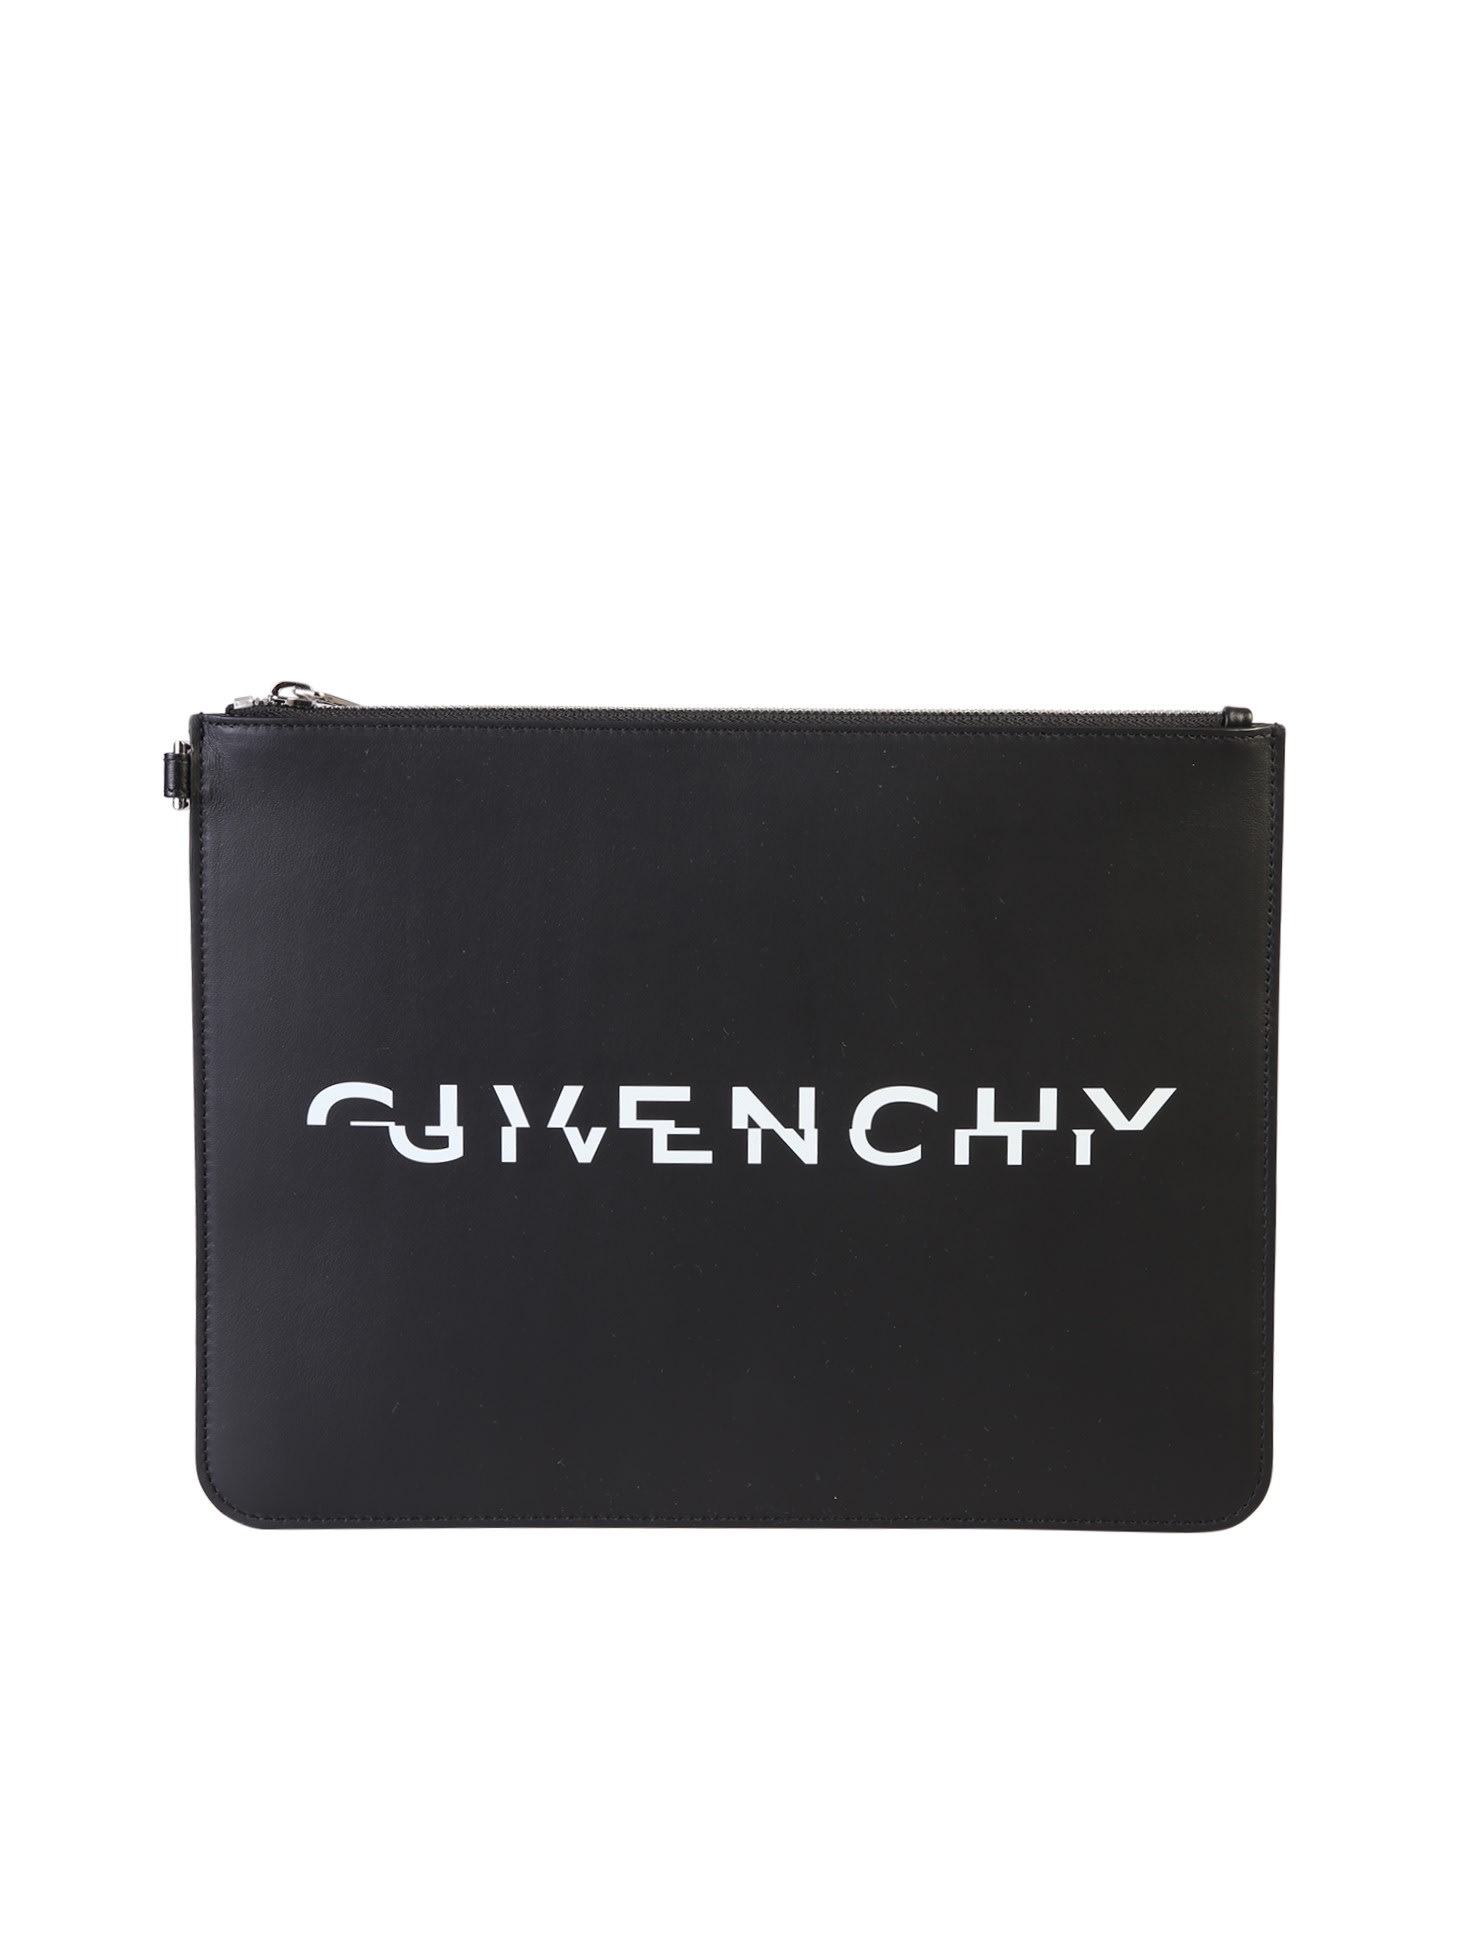 GIVENCHY LOGO PRINT LEATHER POUCH,11216122